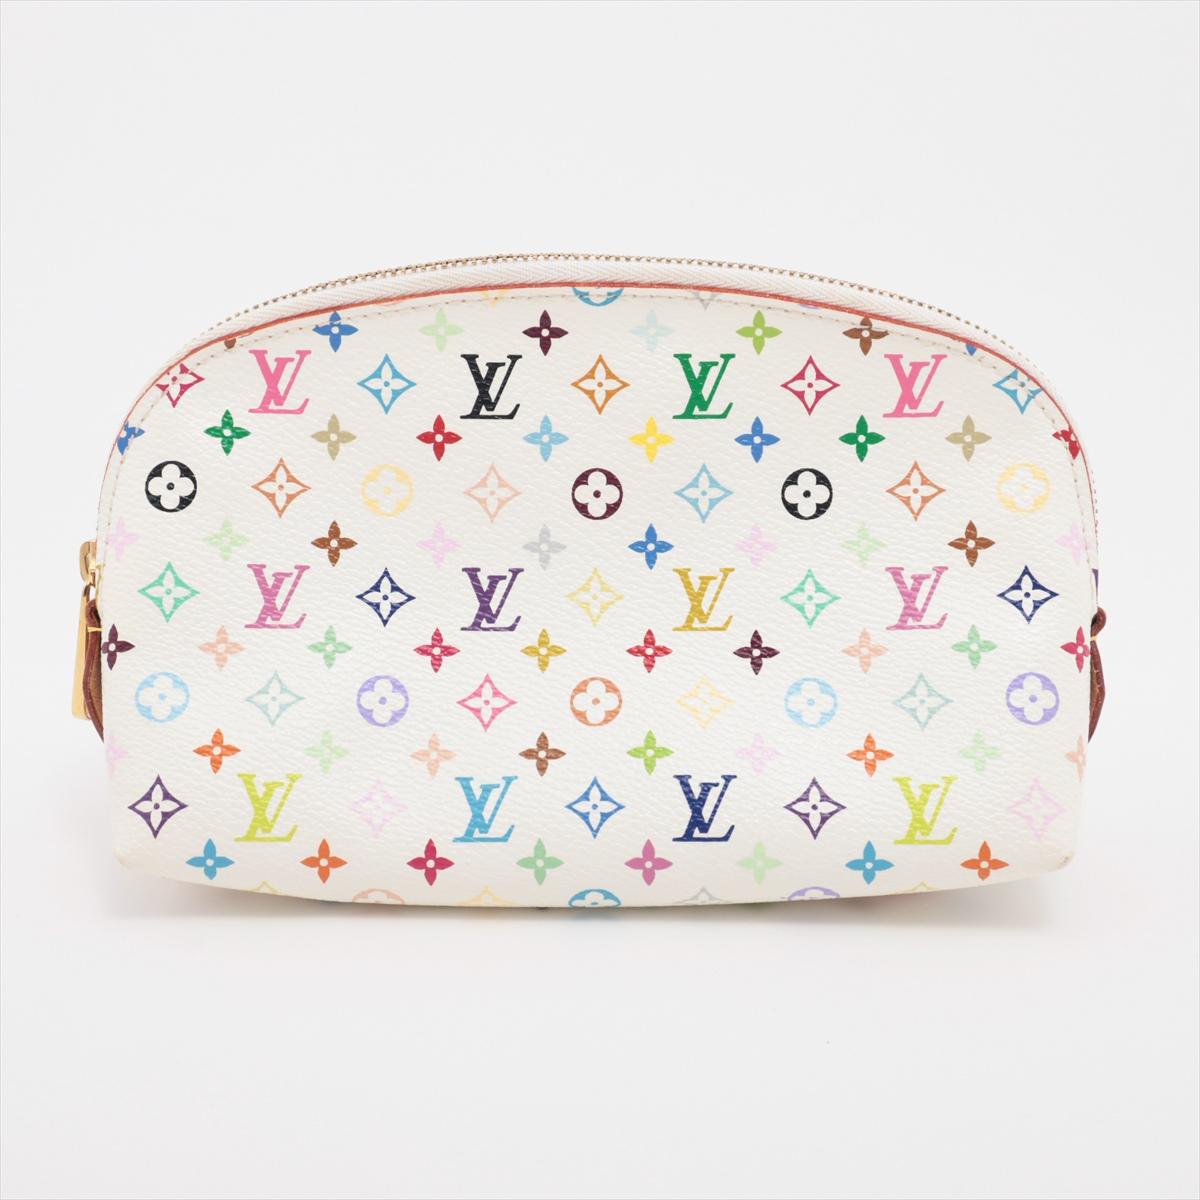 The Louis Vuitton Monogram Multicolor Pochette Cosmetic in White is a chic and versatile accessory that adds a pop of color to any ensemble. Crafted from iconic Monogram canvas adorned with vibrant multicolored motifs, the cosmetic pouch exudes a